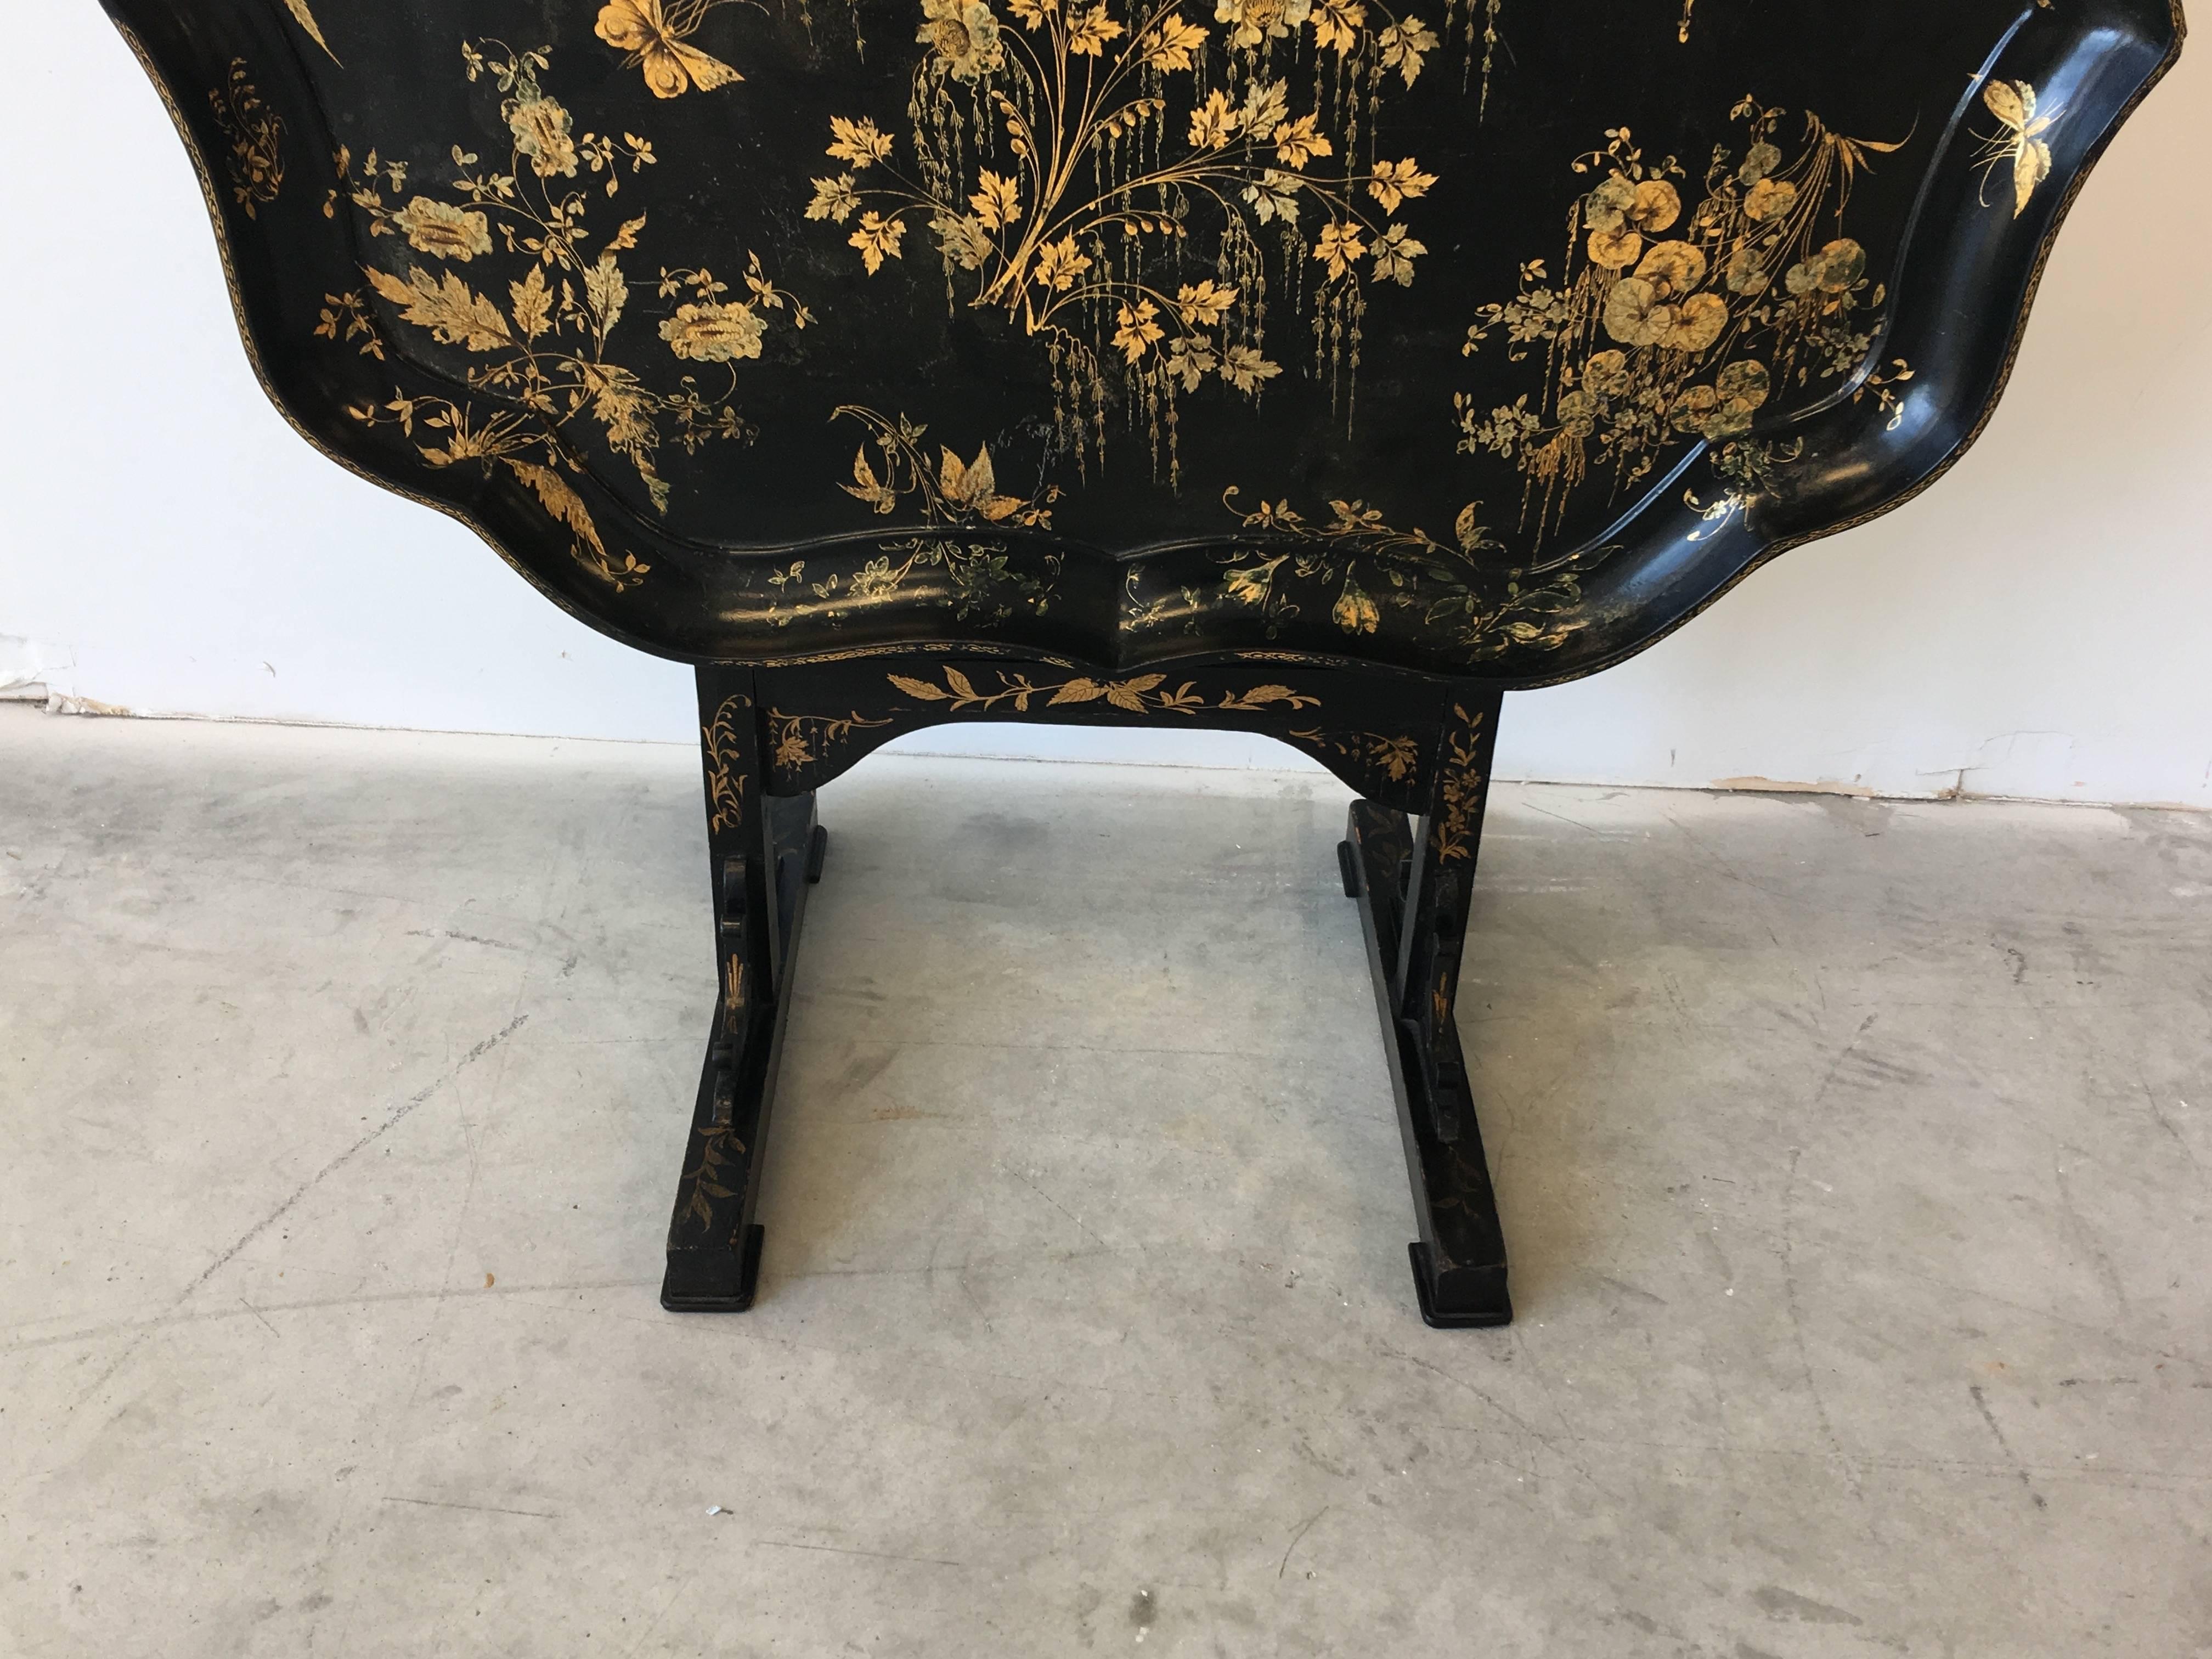 Chinoiserie 19th Century Japanned Black and Gold Lacquered Tilt-Top Table